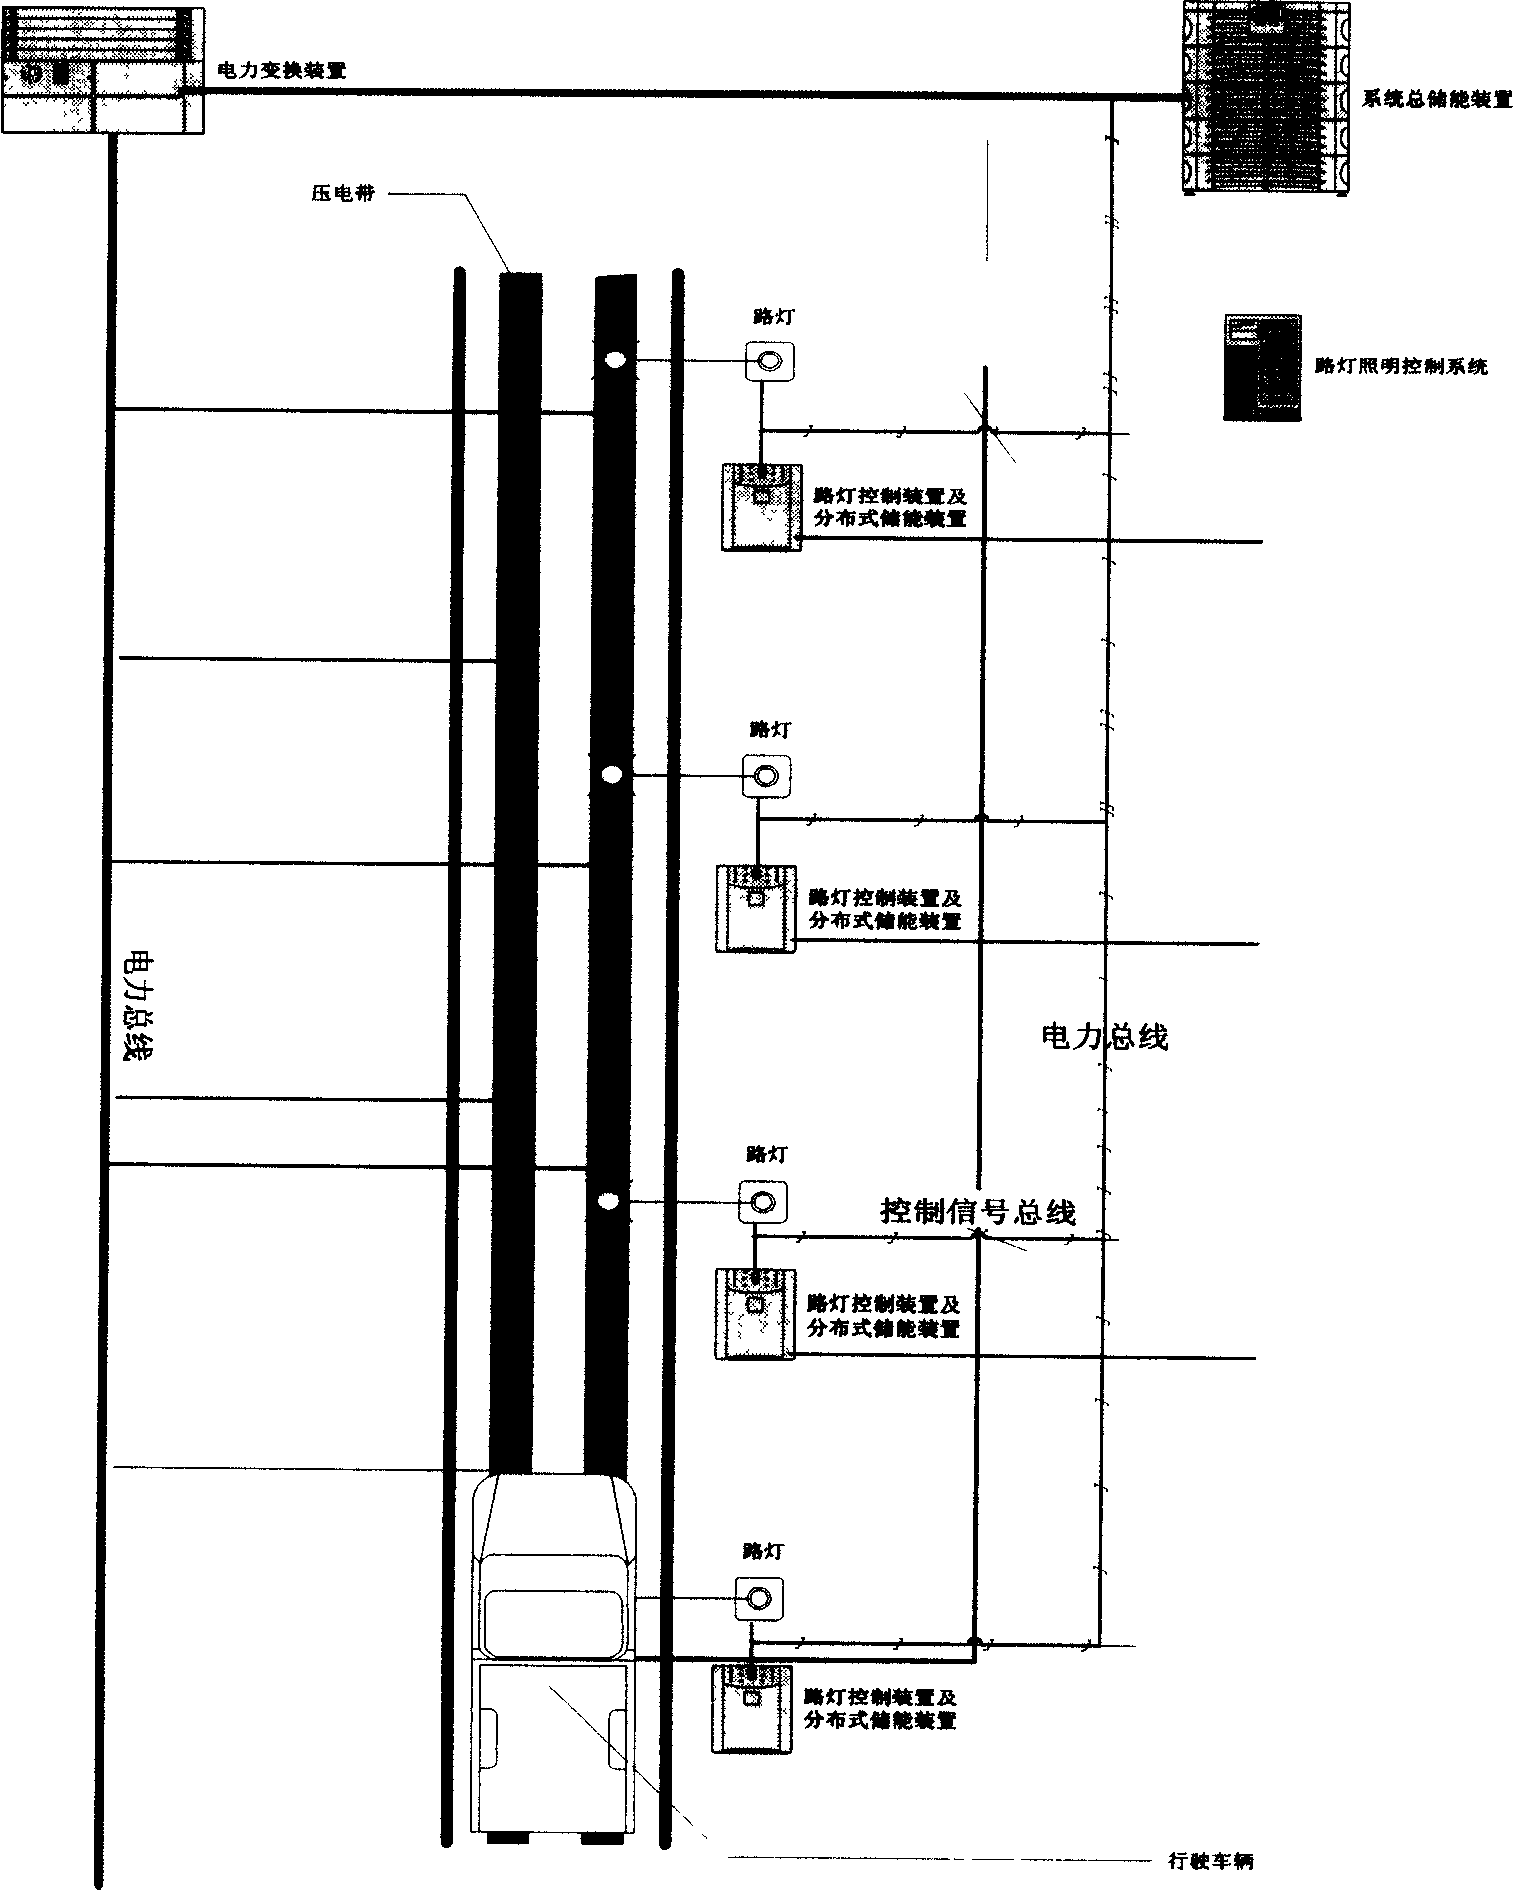 Method of piezoelectric power generation by using vibration energy of road surface, and street lighting luminaire system therefor